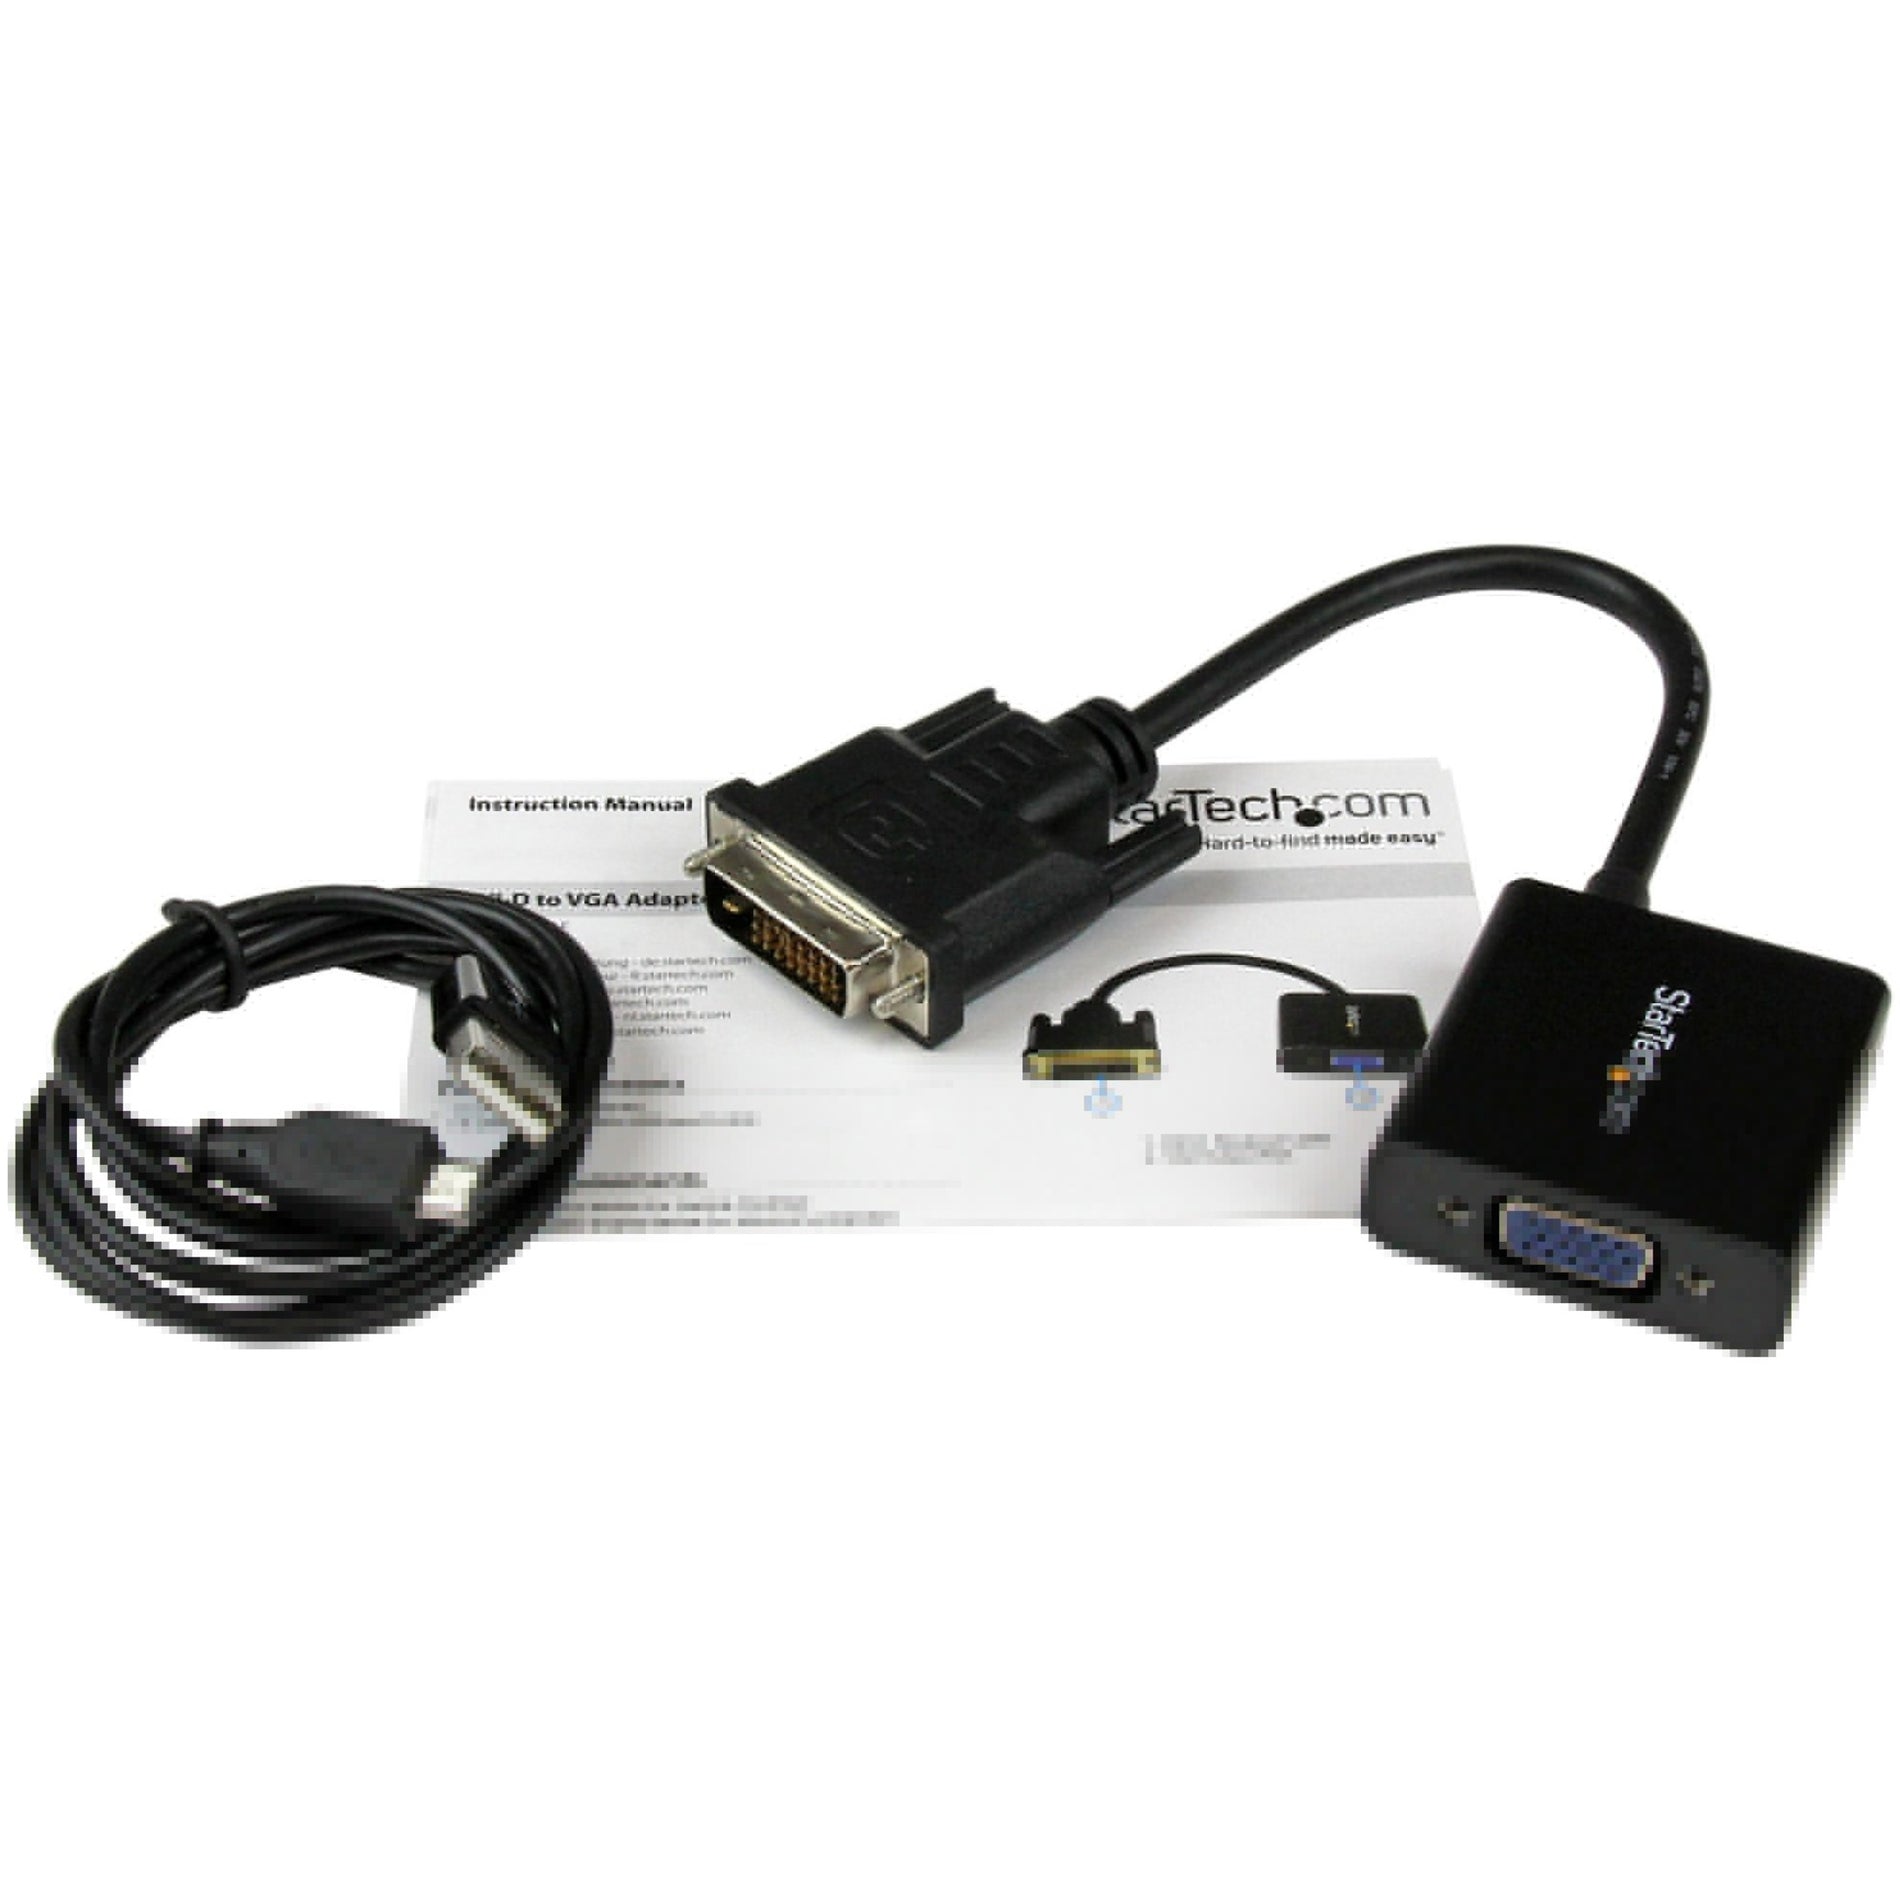 StarTech.com DVI2VGAE DVI-D to VGA Active Adapter Converter Cable - 1920x1200, USB Power Delivery (USB PD), 2-Year Warranty